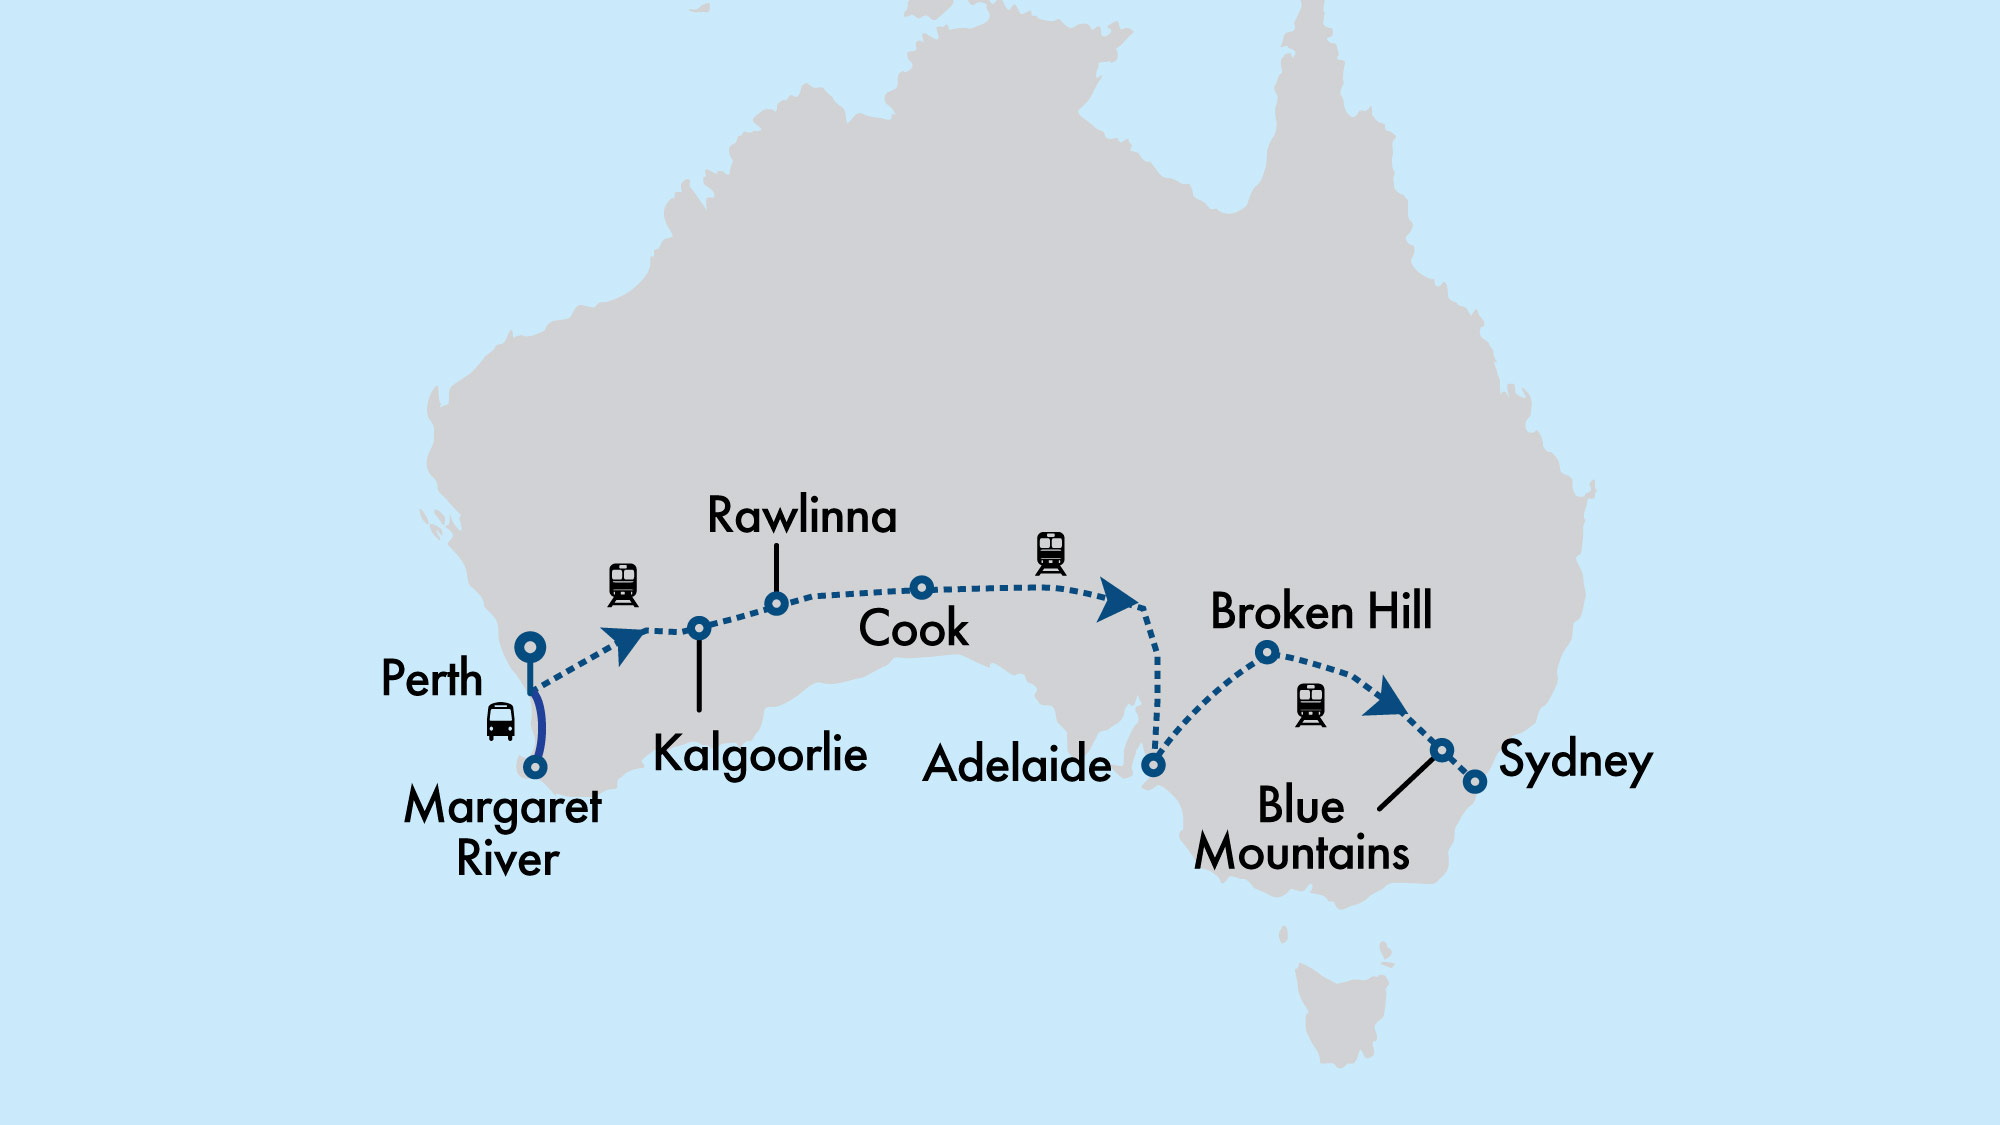 WA Wine, Wildflowers & Rottnest Island with Indian Pacific from Perth to Sydney